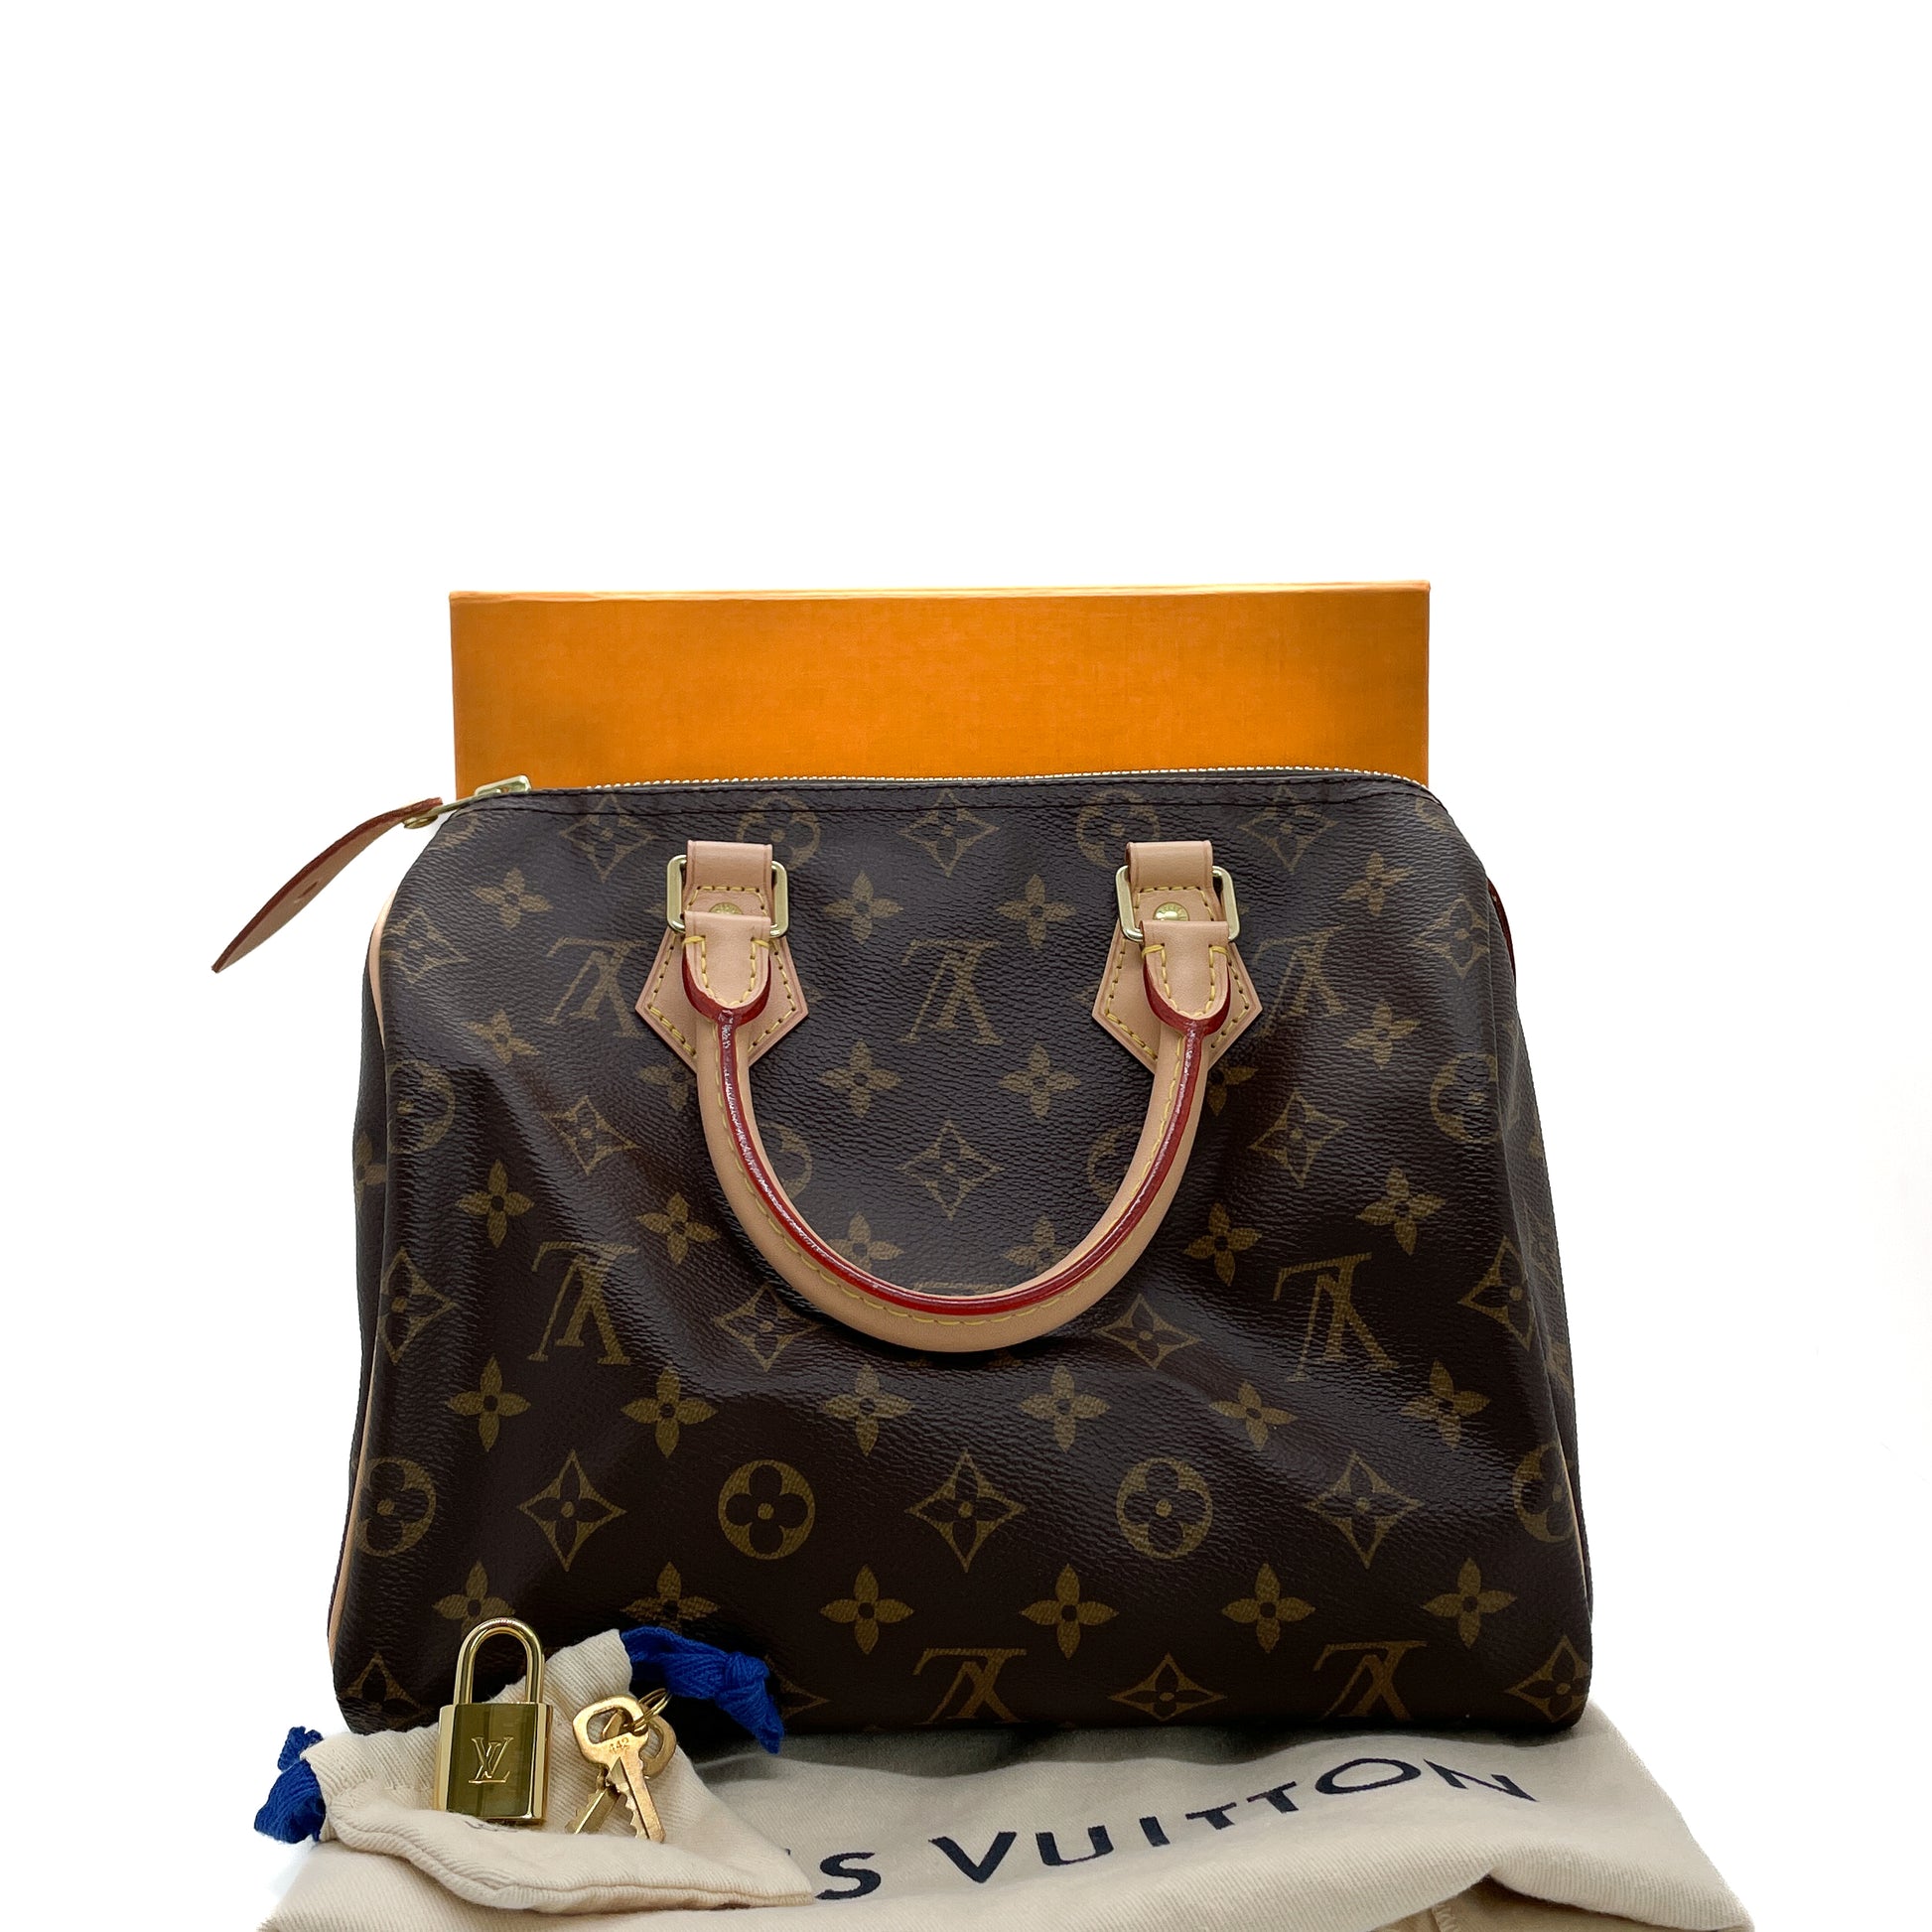 Discussing whether the Louis Vuitton Speedy is still in style on